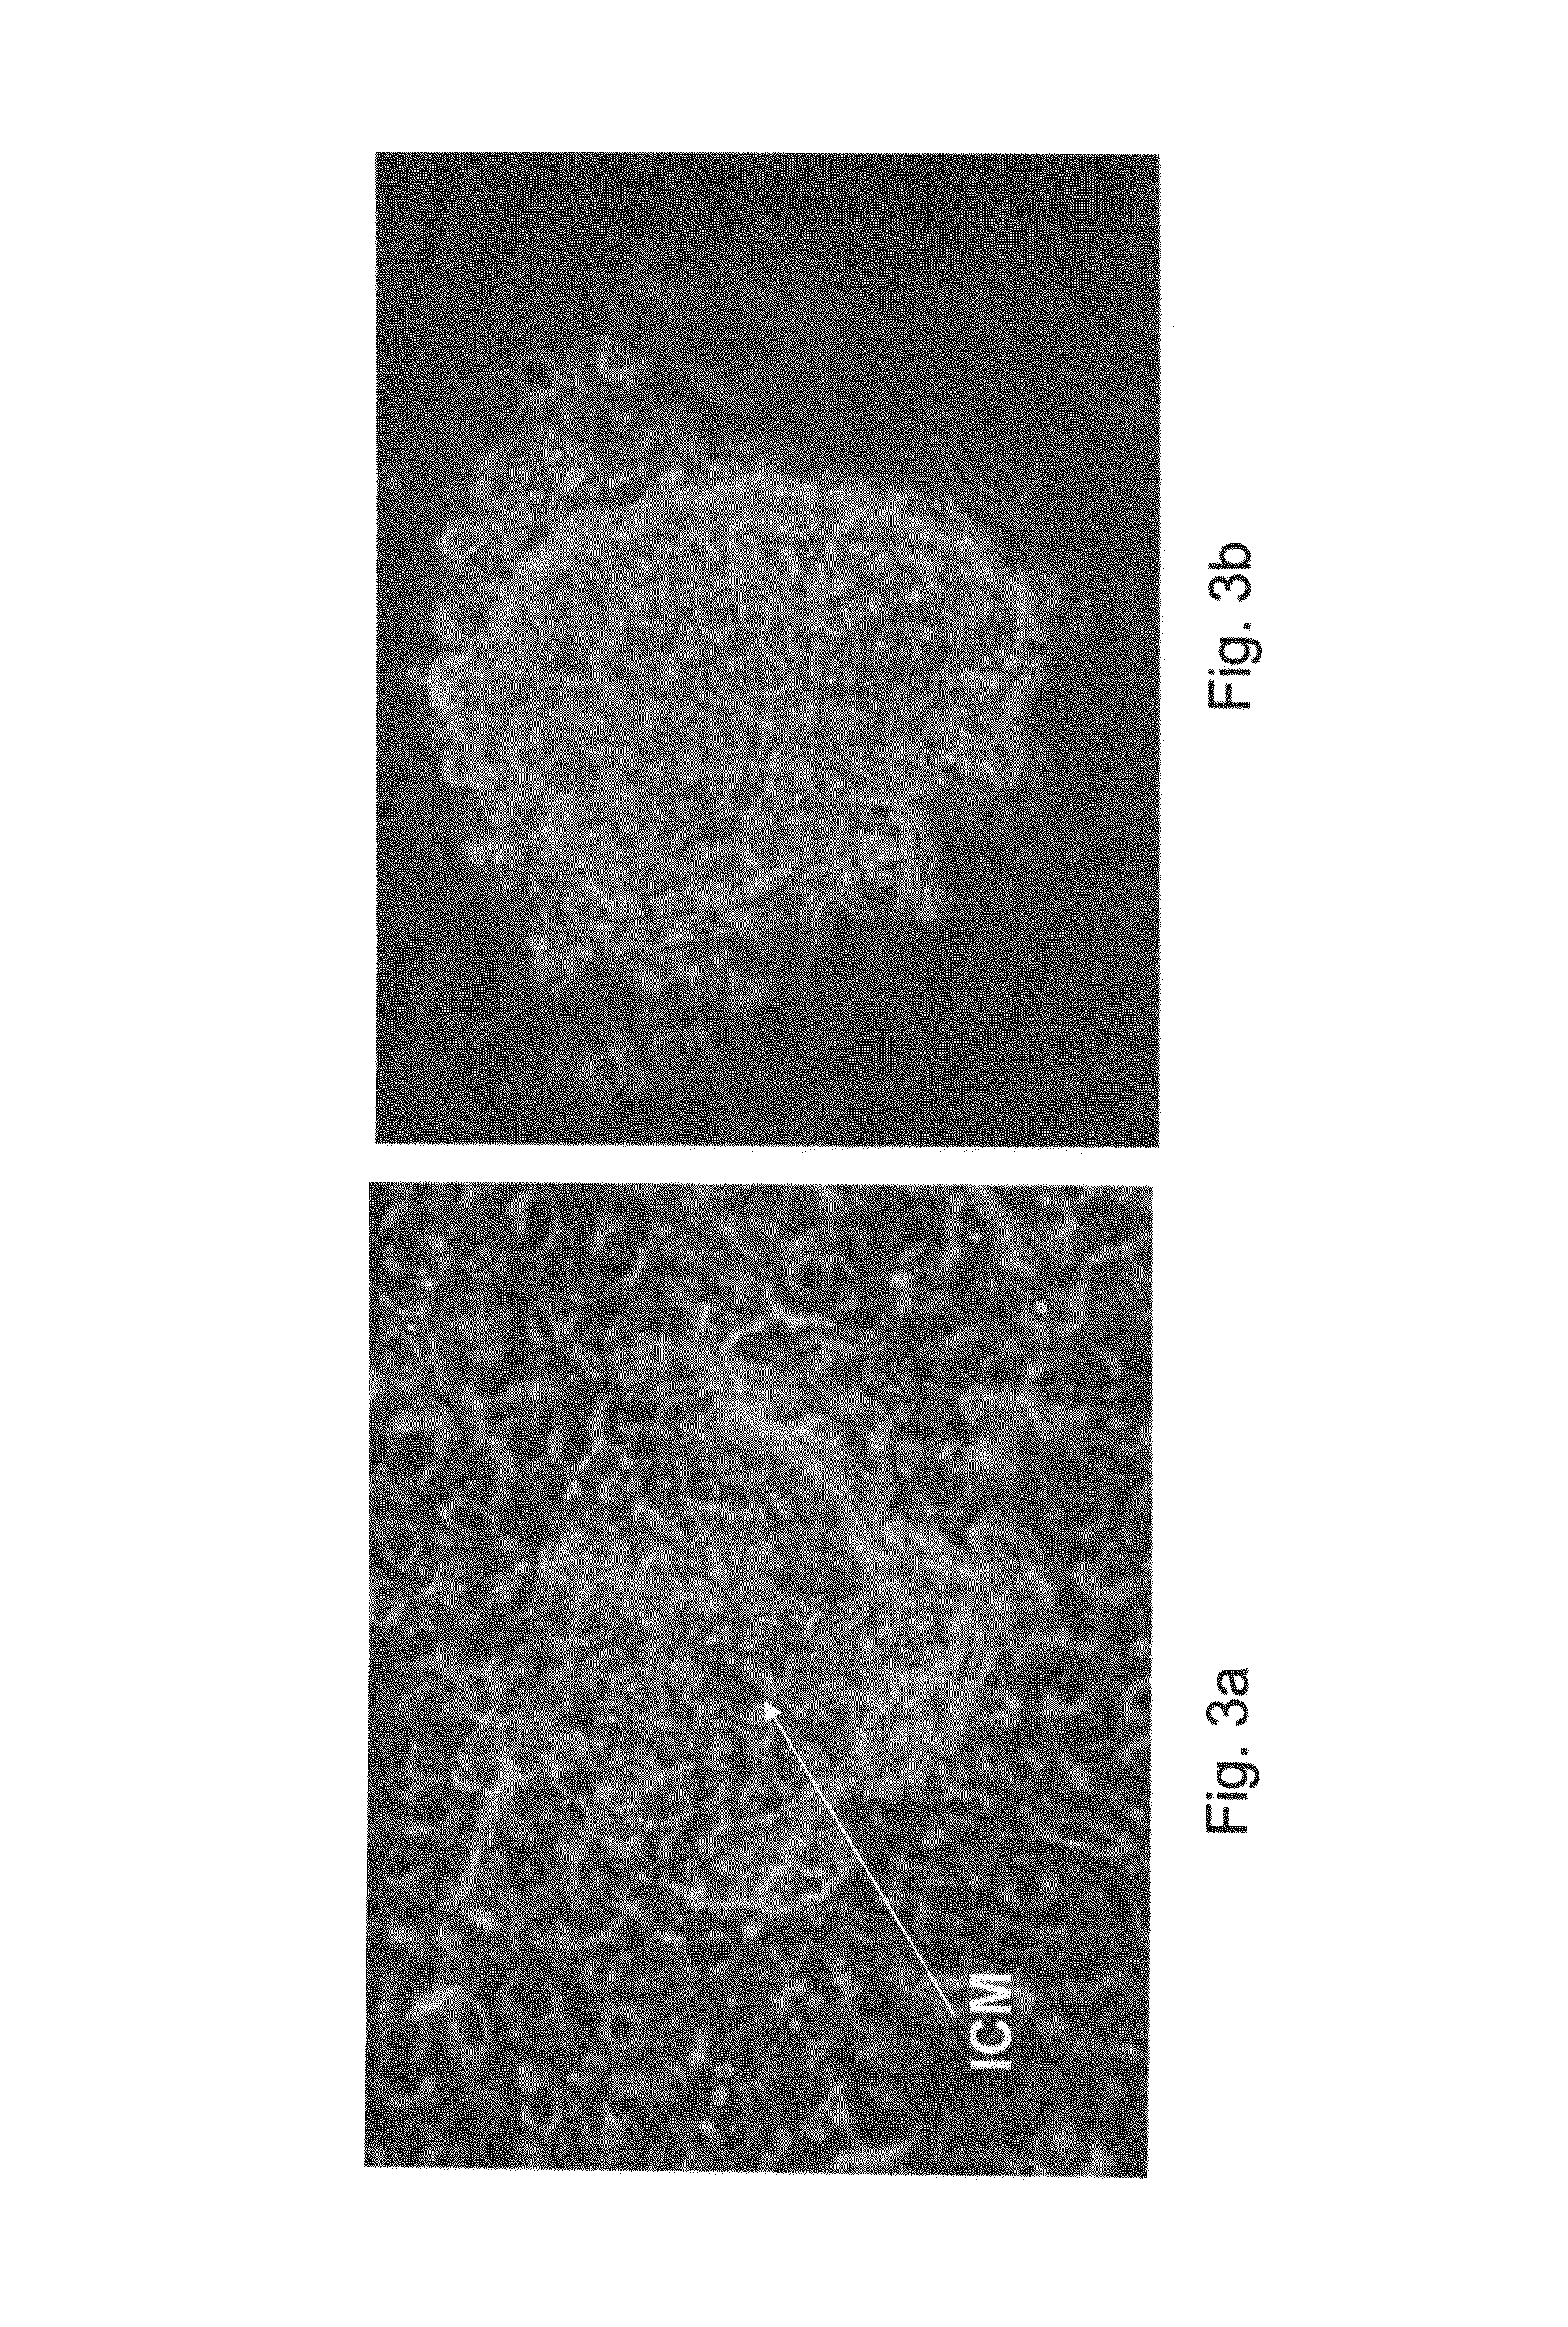 Methods of expanding embryonic stem cells in a suspension culture